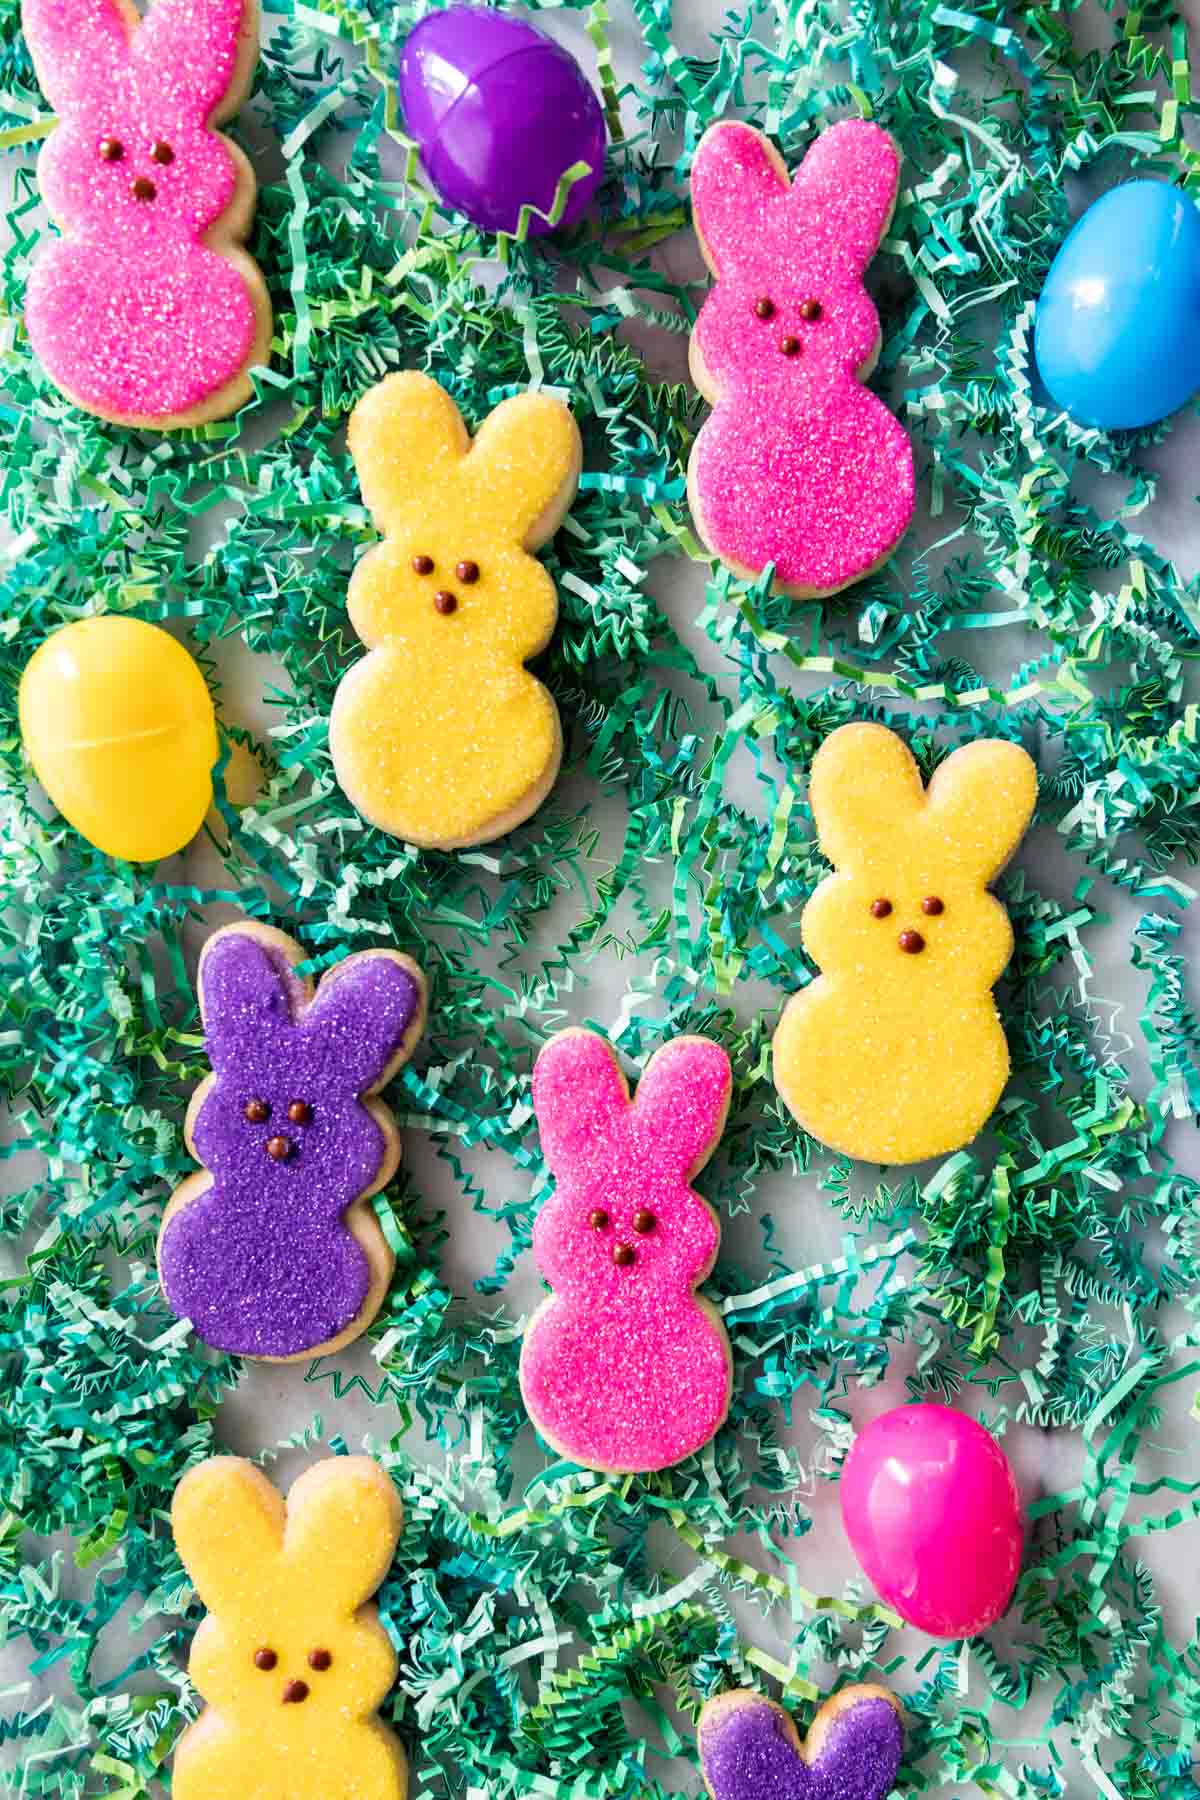 green easter grass with colorful bunny shaped sugar cookies and plastic eggs scattered throughout